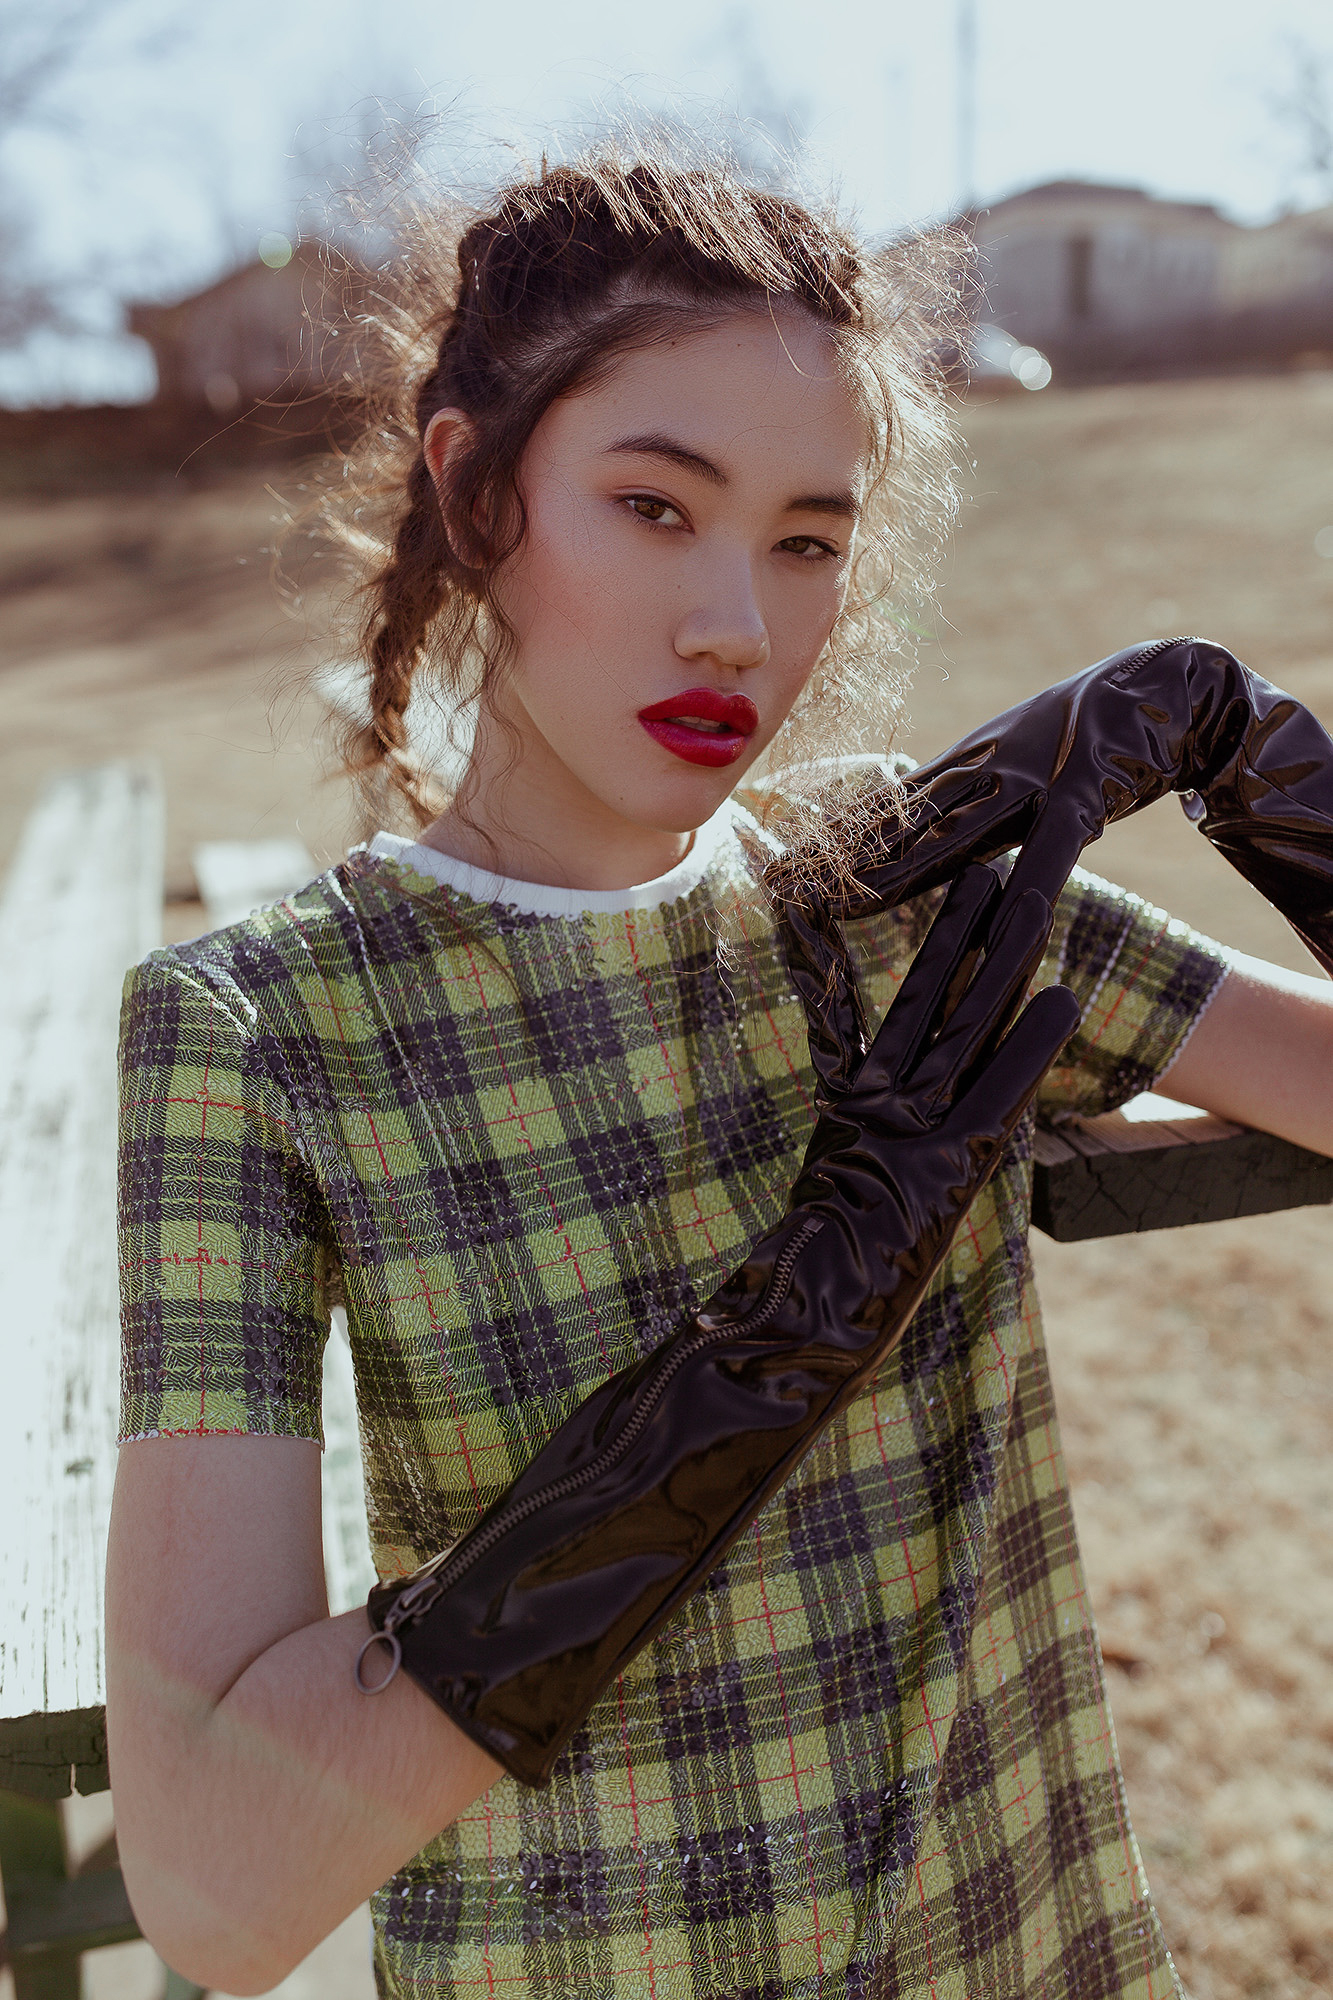 Park Play - Editorial by Brittany Phillips